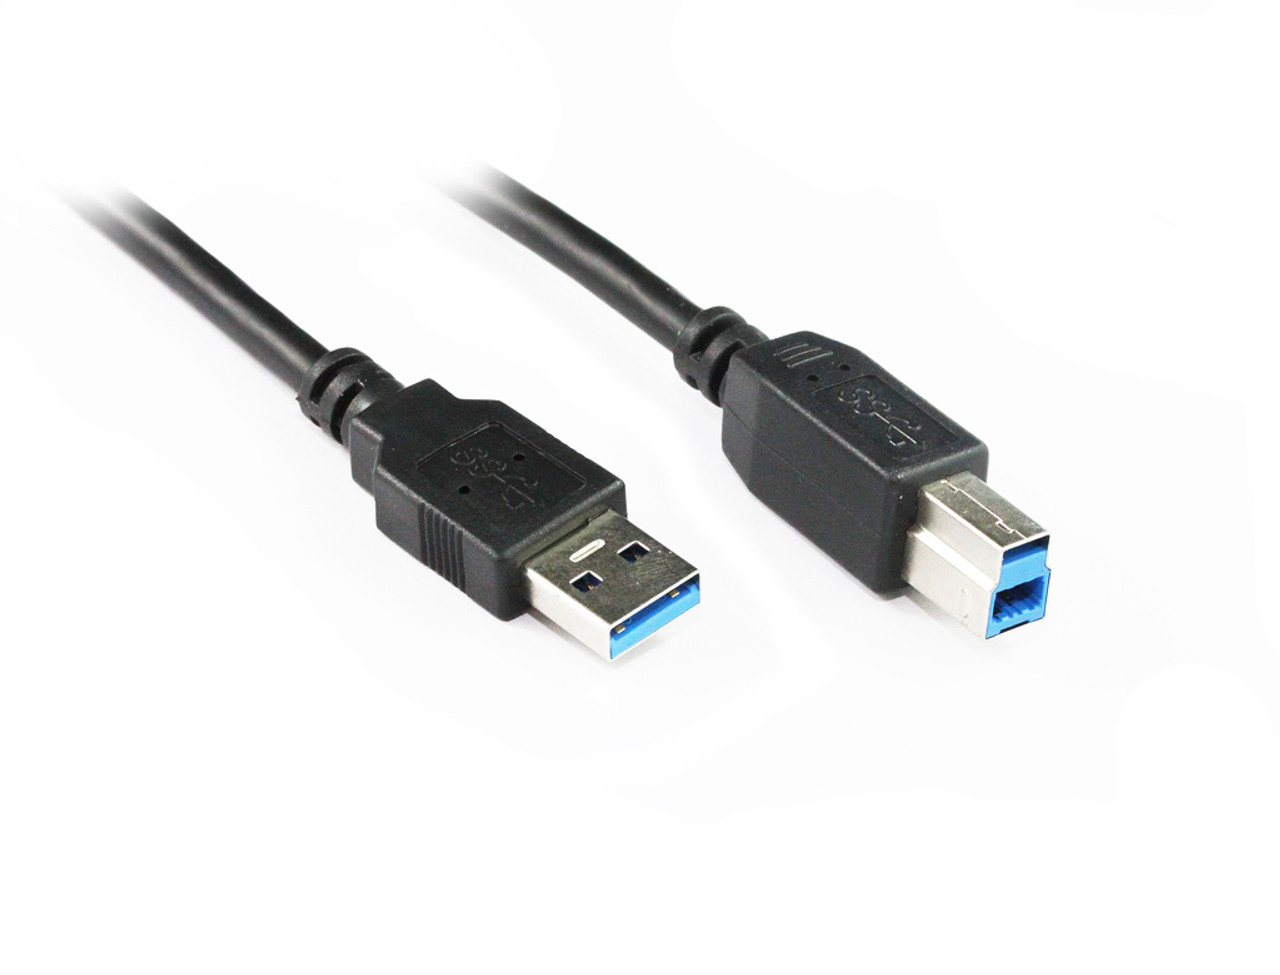 5M USB 3.0 AM/BM Cable in Black